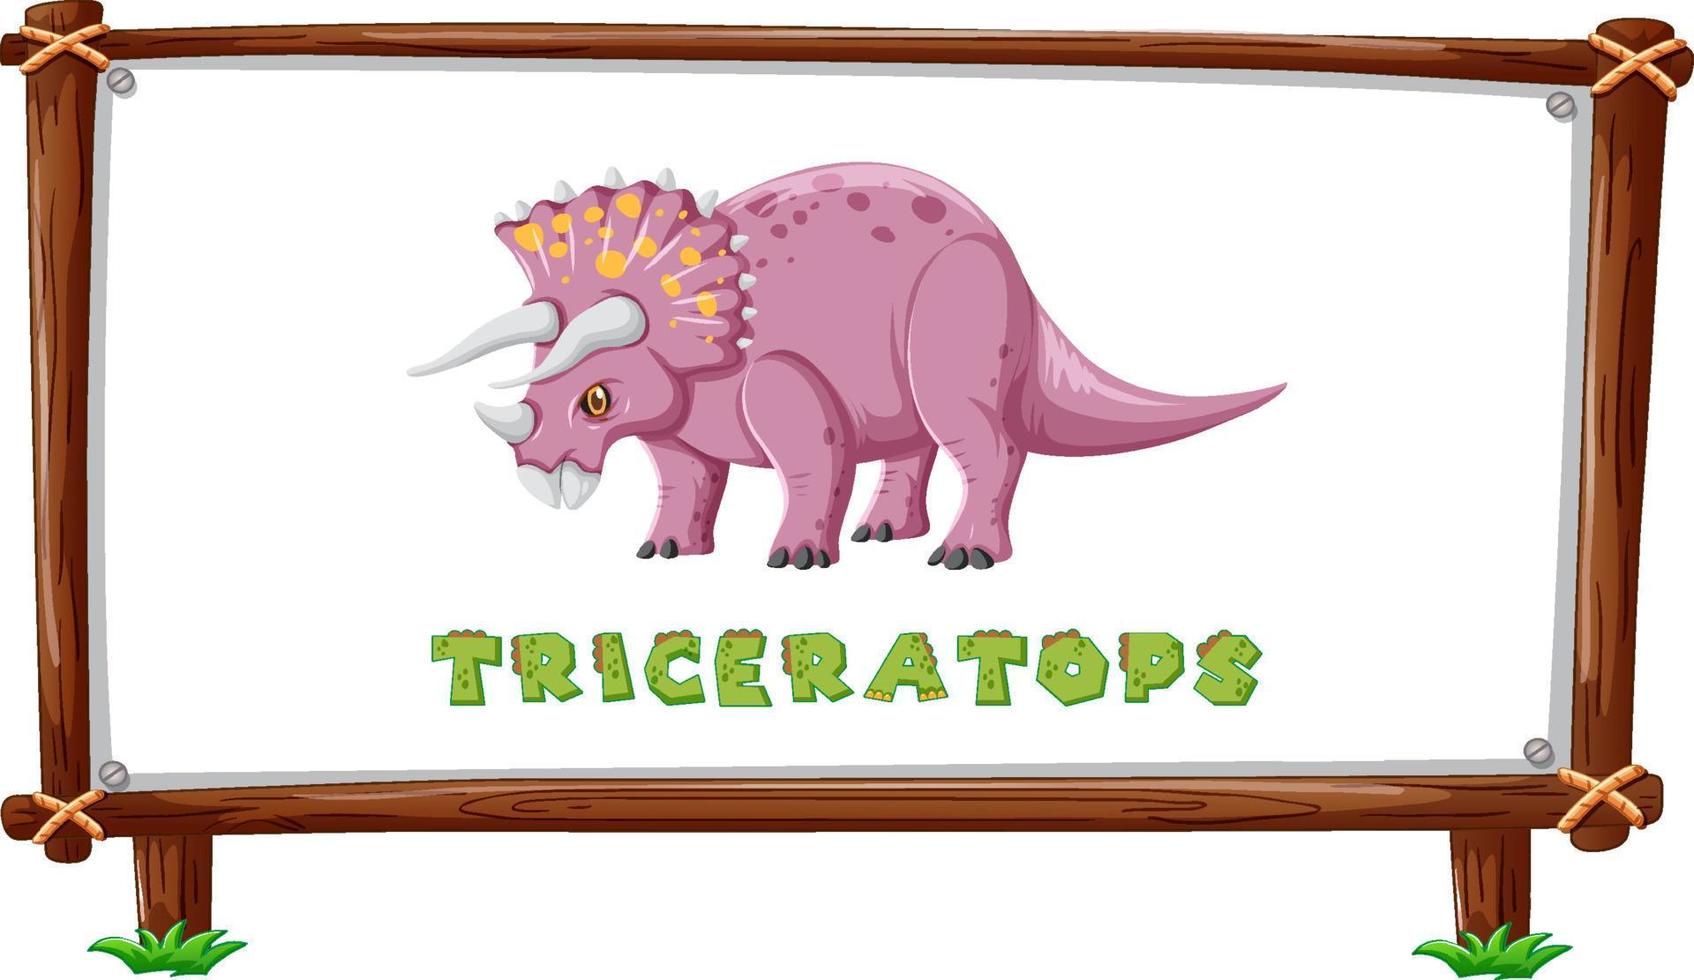 Frame template with dinosaurs and text triceratops design inside vector